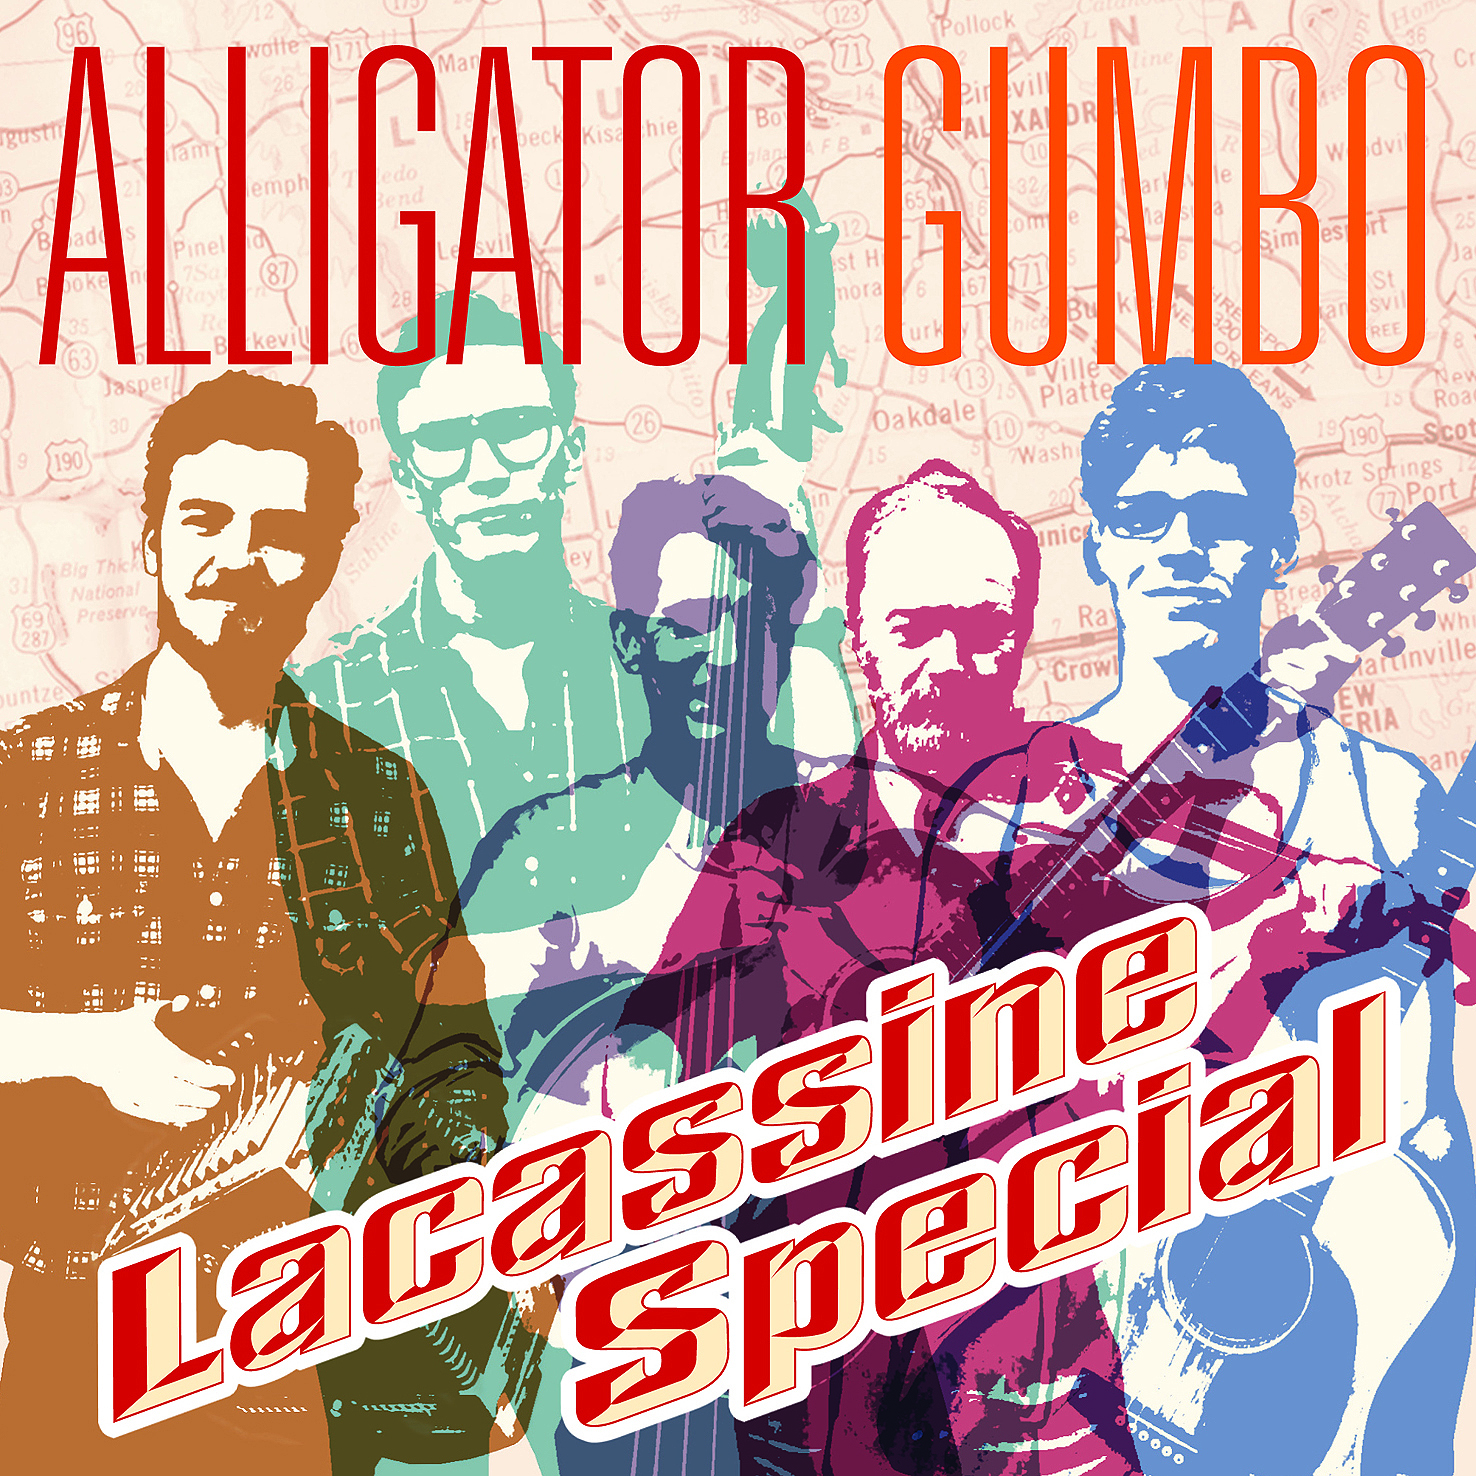 Alligator Gumbo – Lacassine Special. No longer available from us. Since Nov. 2014 distributed by Rootsy.nu Alligator Gumbo - Lacassine Special monophon MPHEP006, 2012.